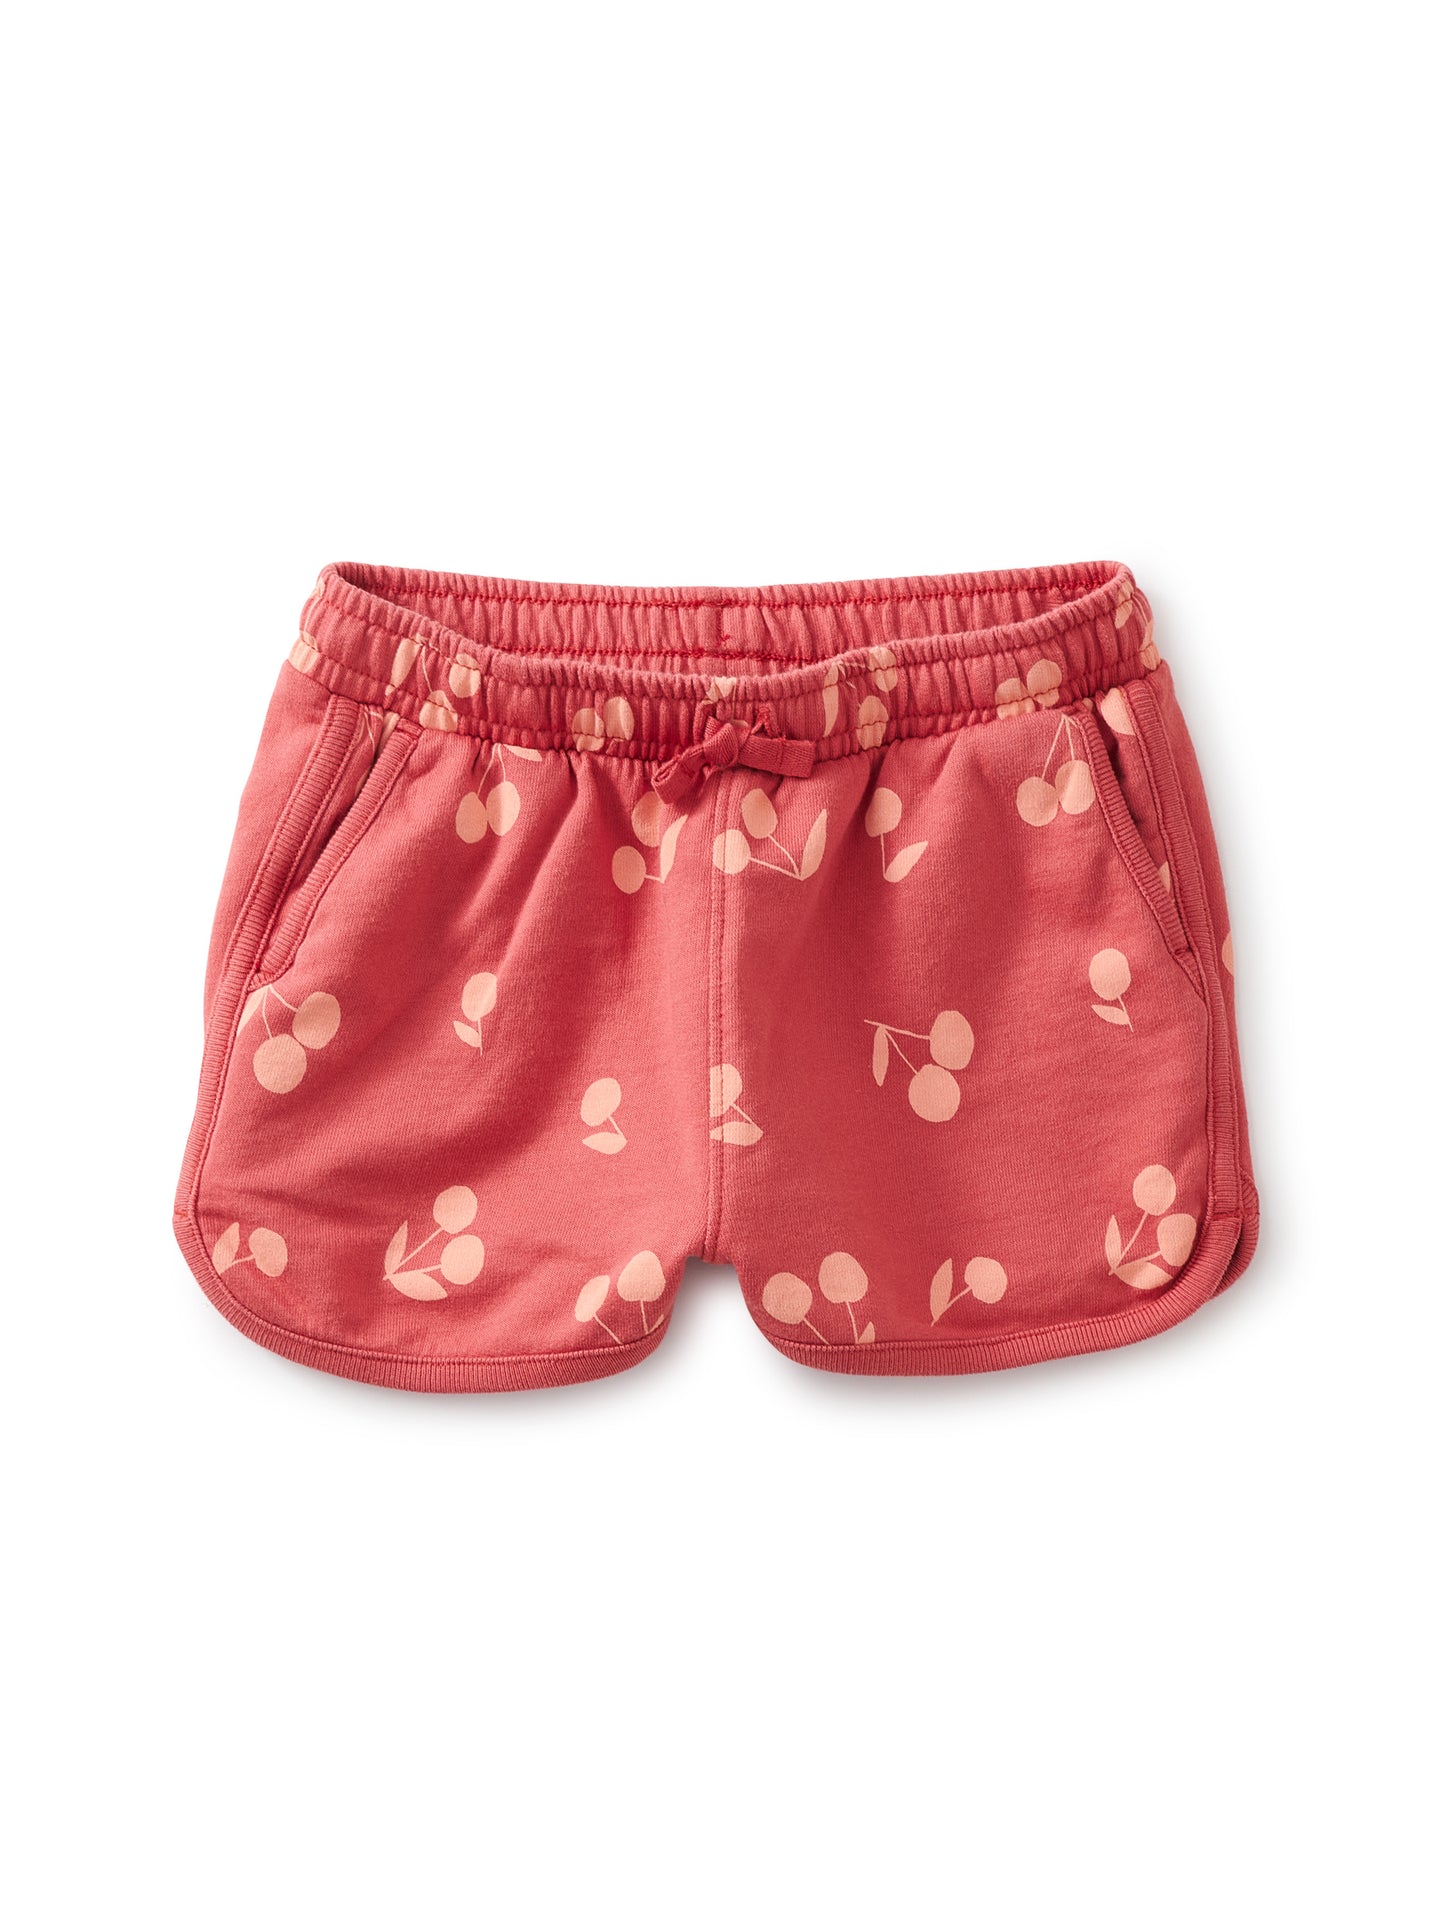 TEA PRINTED TRACK SHORTS - CHERRY TOSS IN TONAL PINK